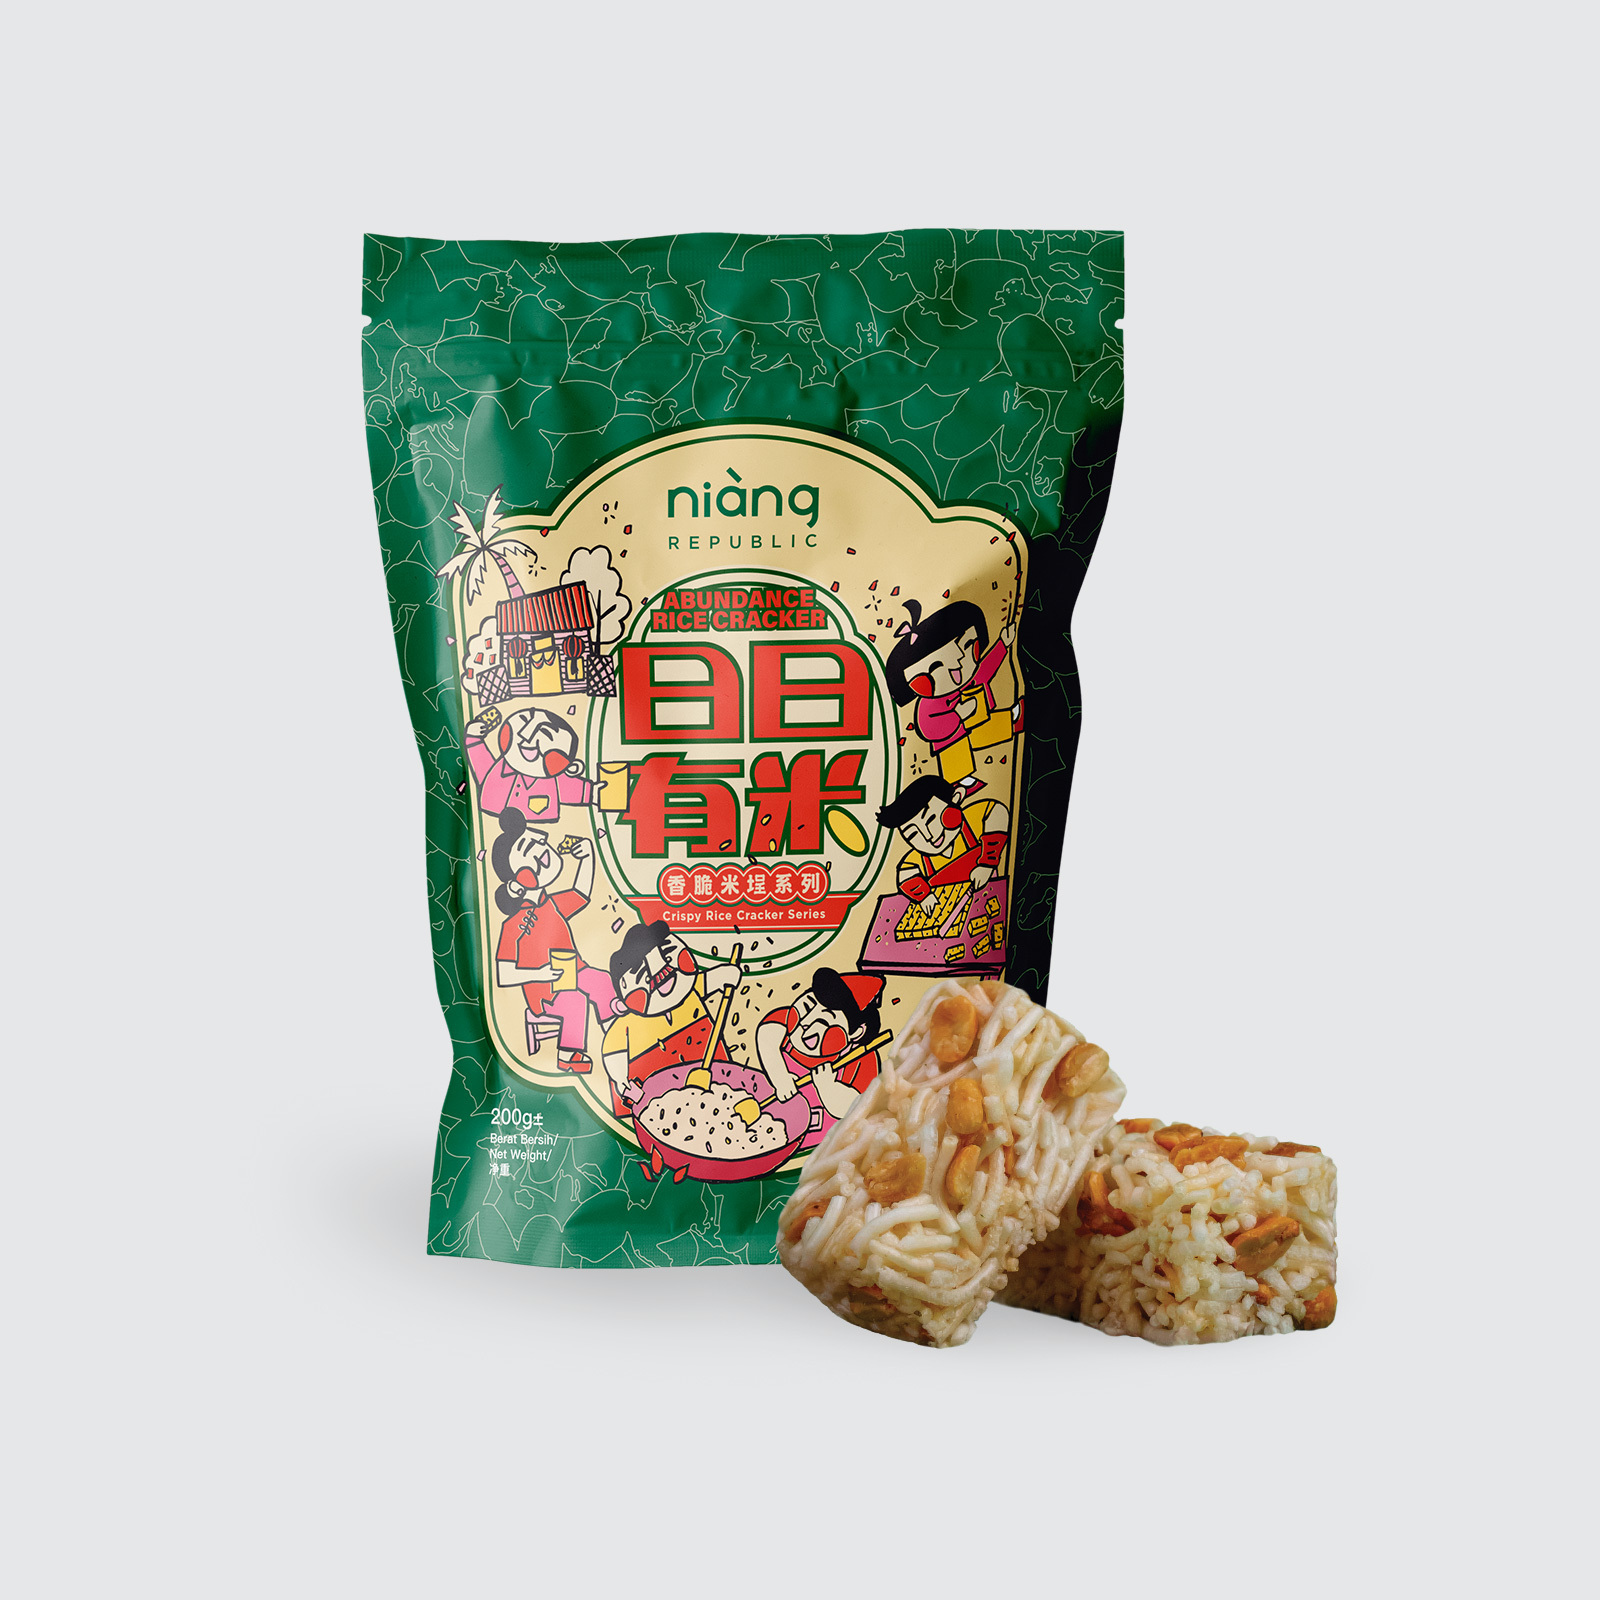 rice-cracker-3product-categories